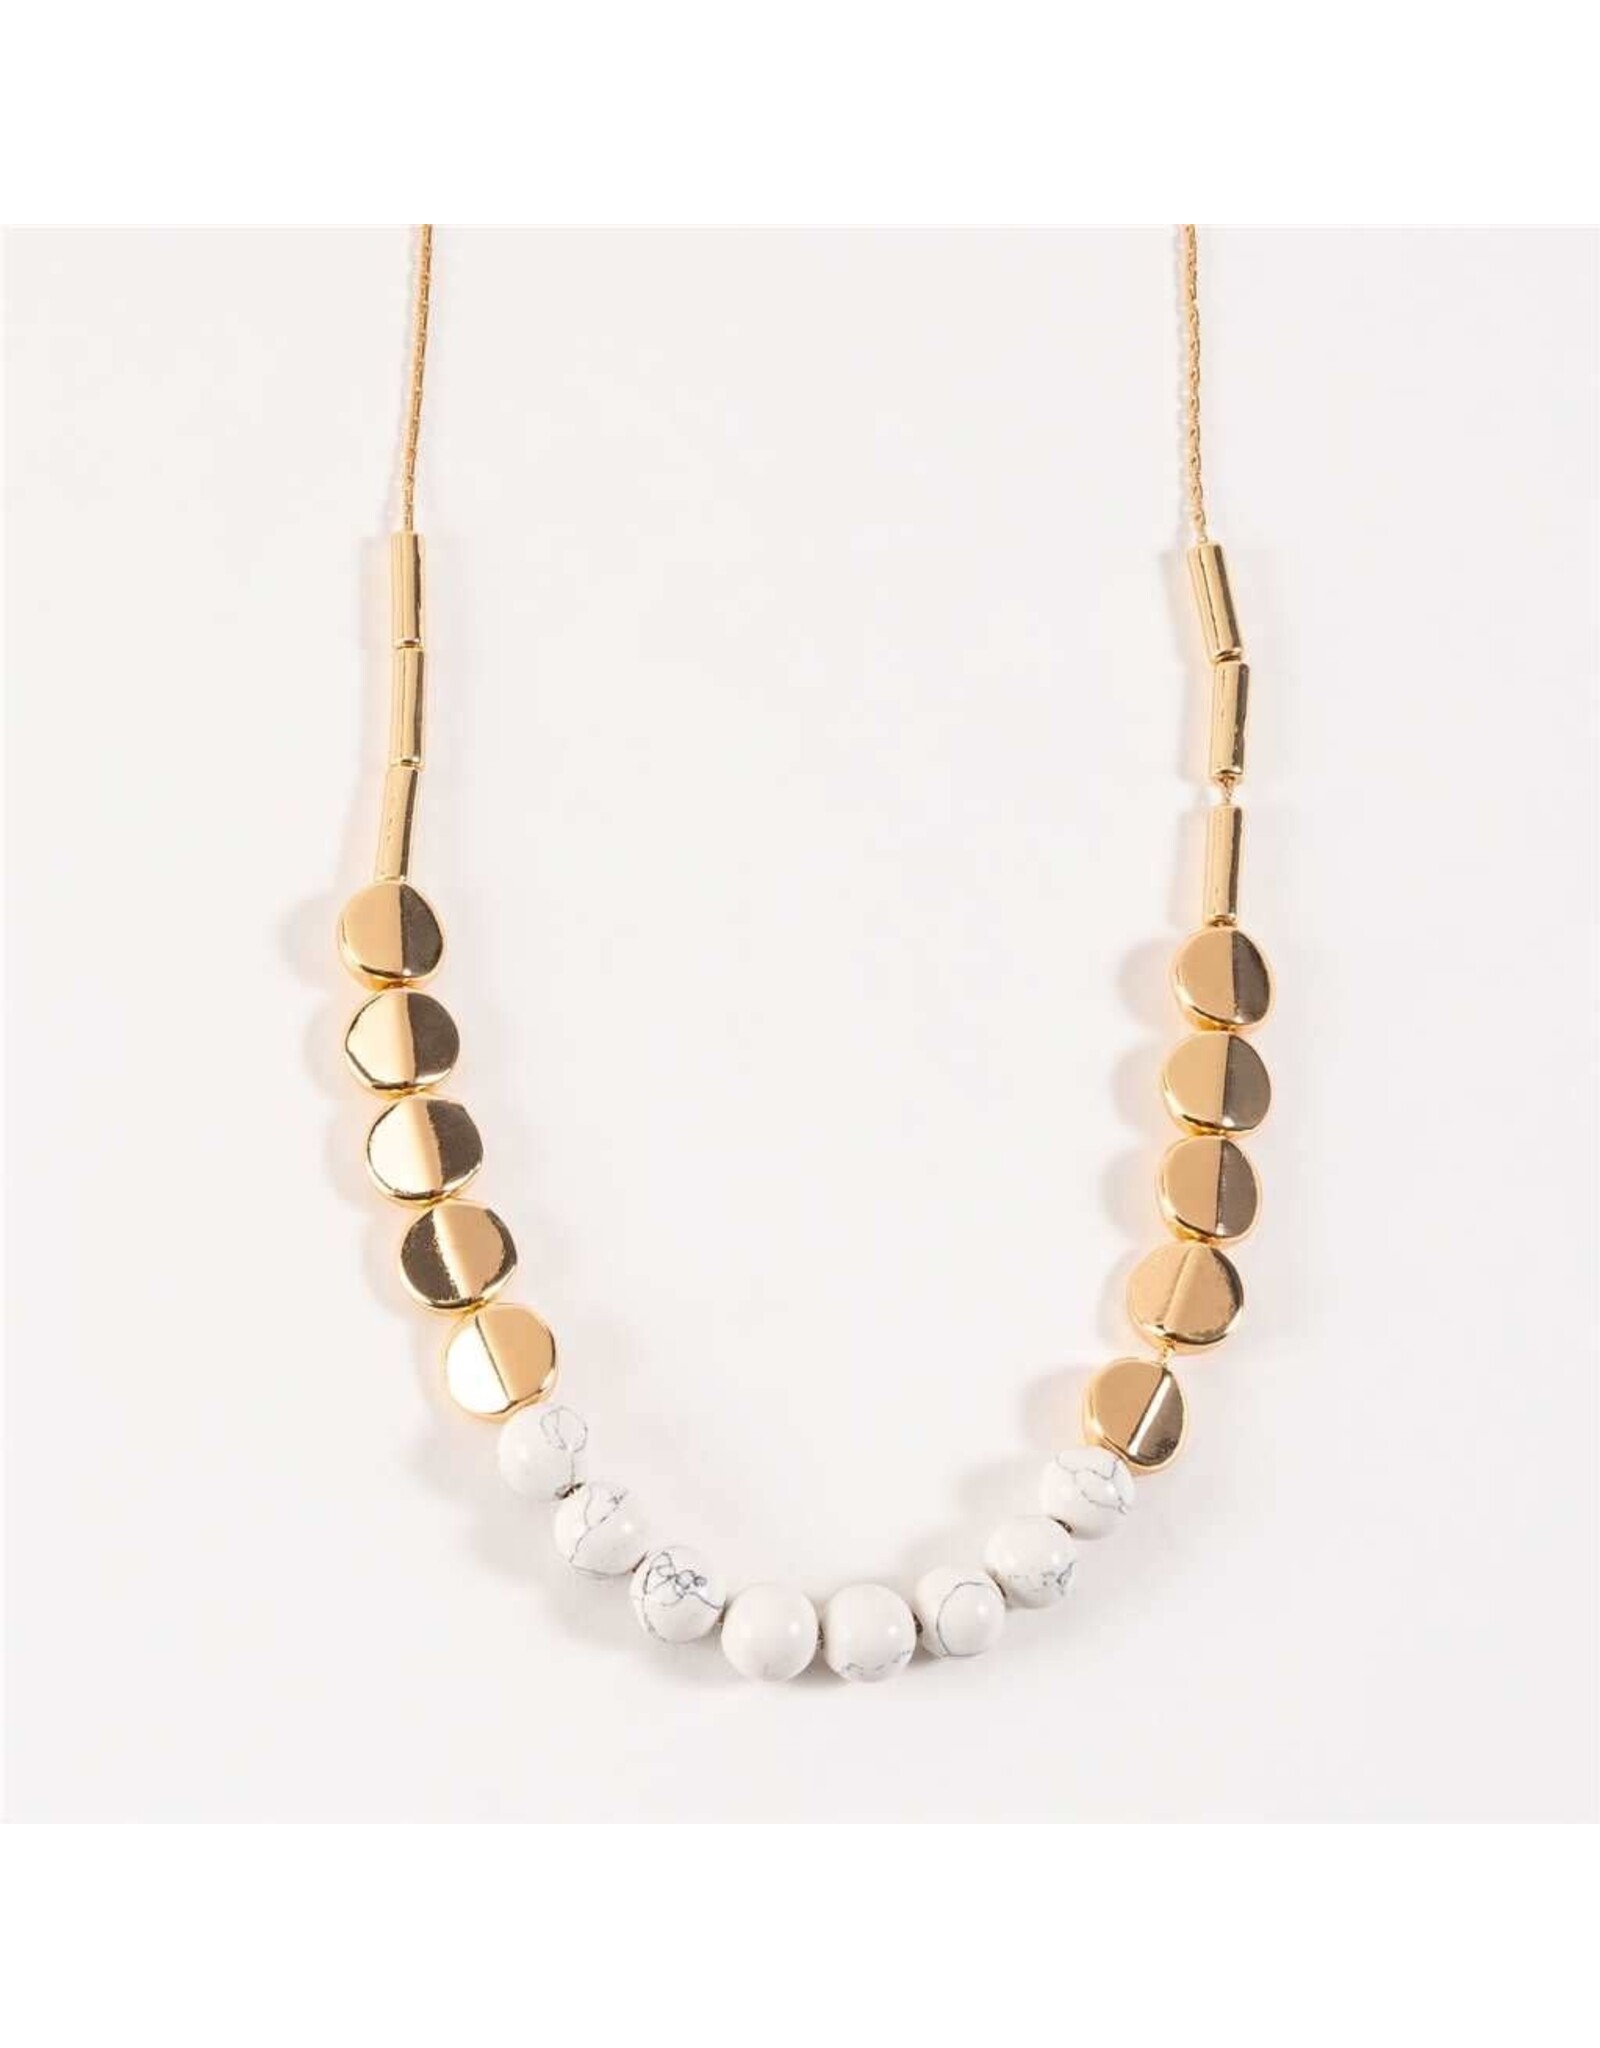 Necklace with white and Gold Beads